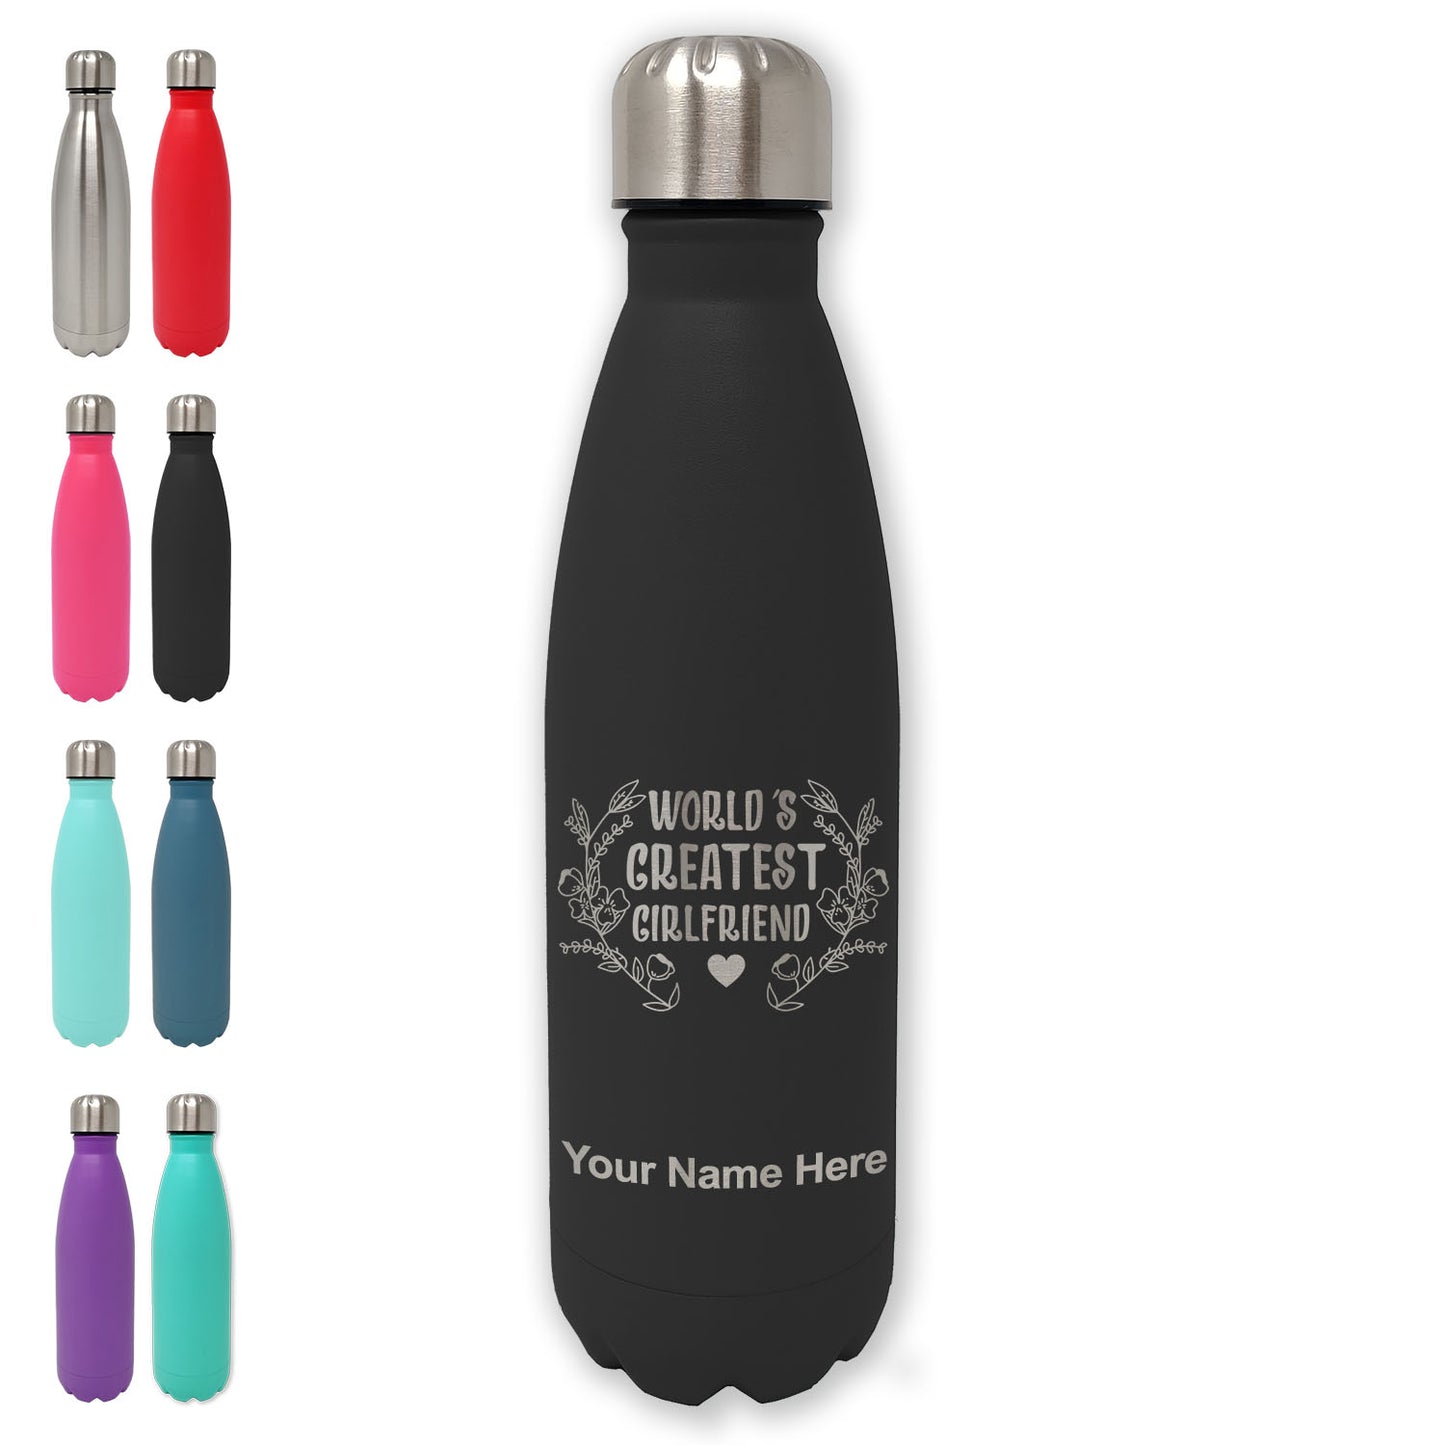 LaserGram Double Wall Water Bottle, World's Greatest Girlfriend, Personalized Engraving Included